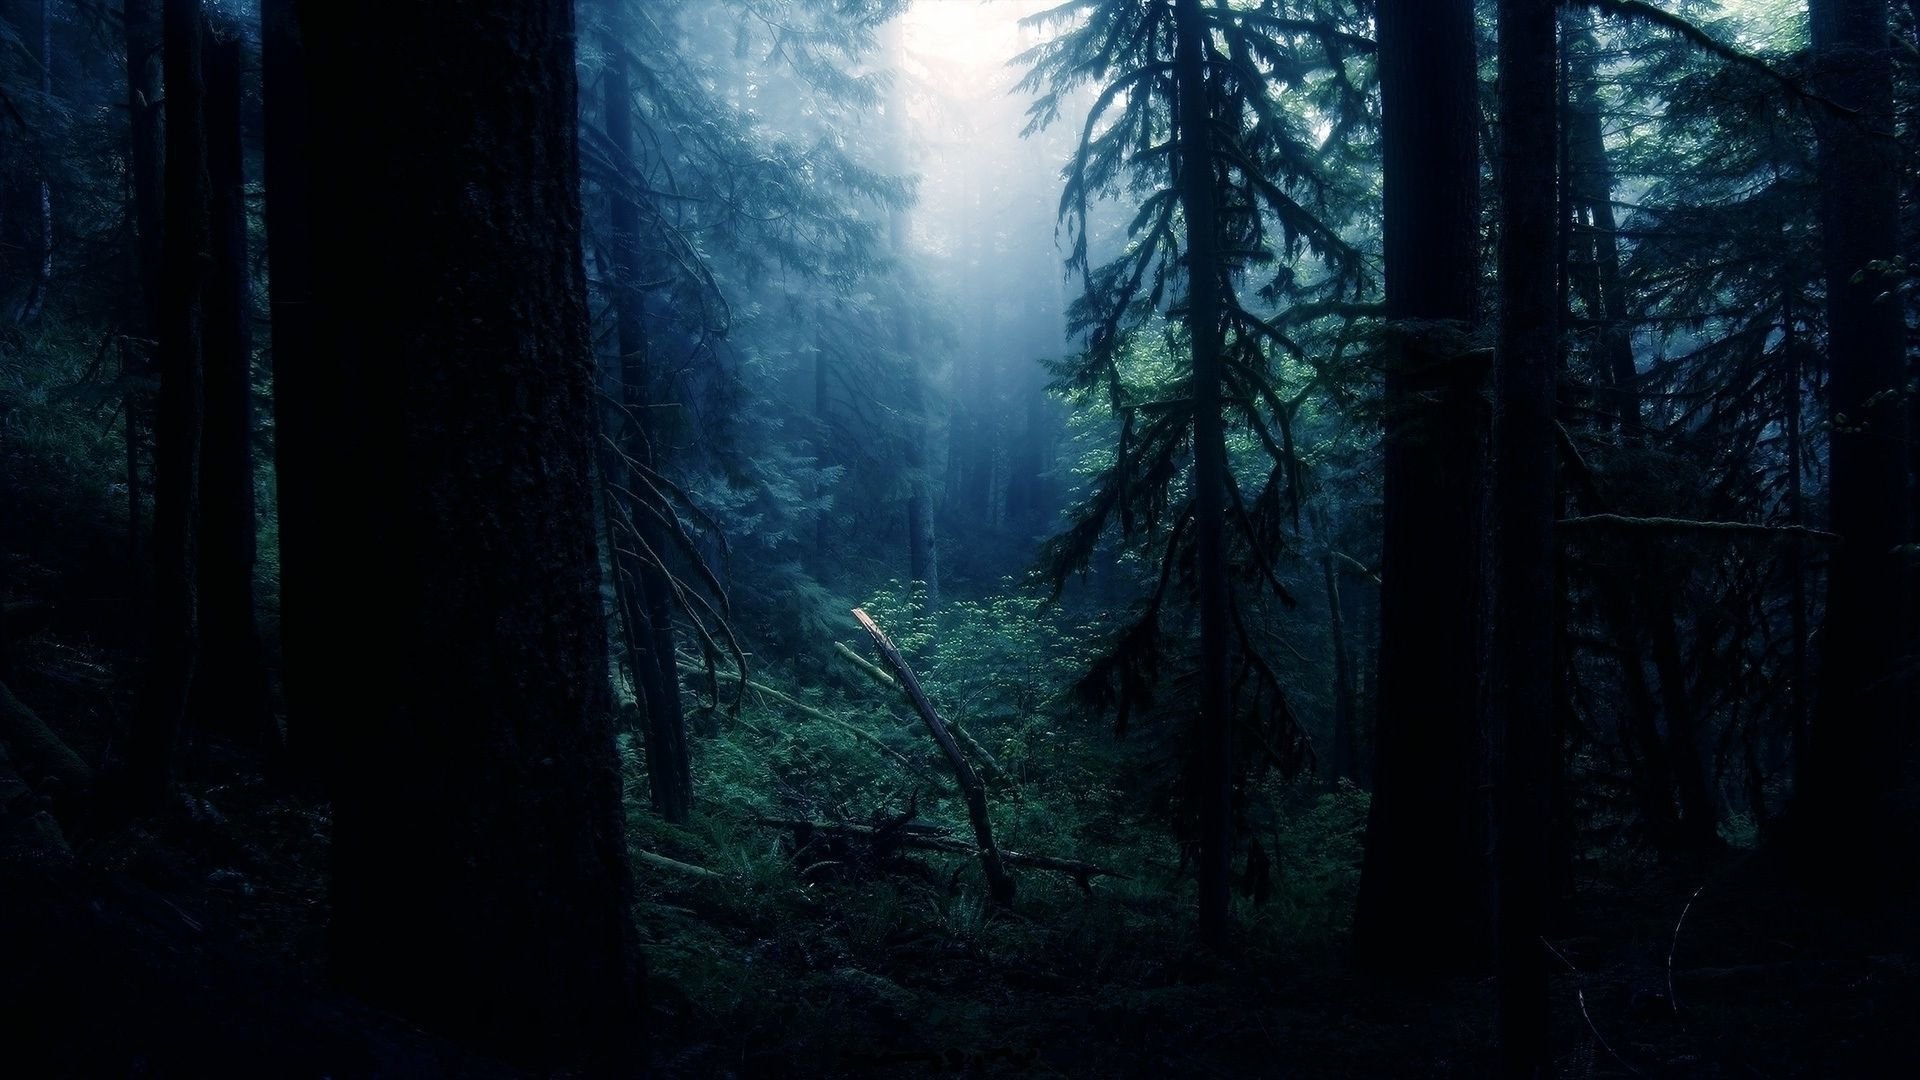 Free Download Forest Night Wallpaper Sf Wallpaper 19x1080 For Your Desktop Mobile Tablet Explore 27 Night Forest Wallpapers Night Forest Wallpapers Winter Forest Wallpaper Night Inside Forest Night Hd